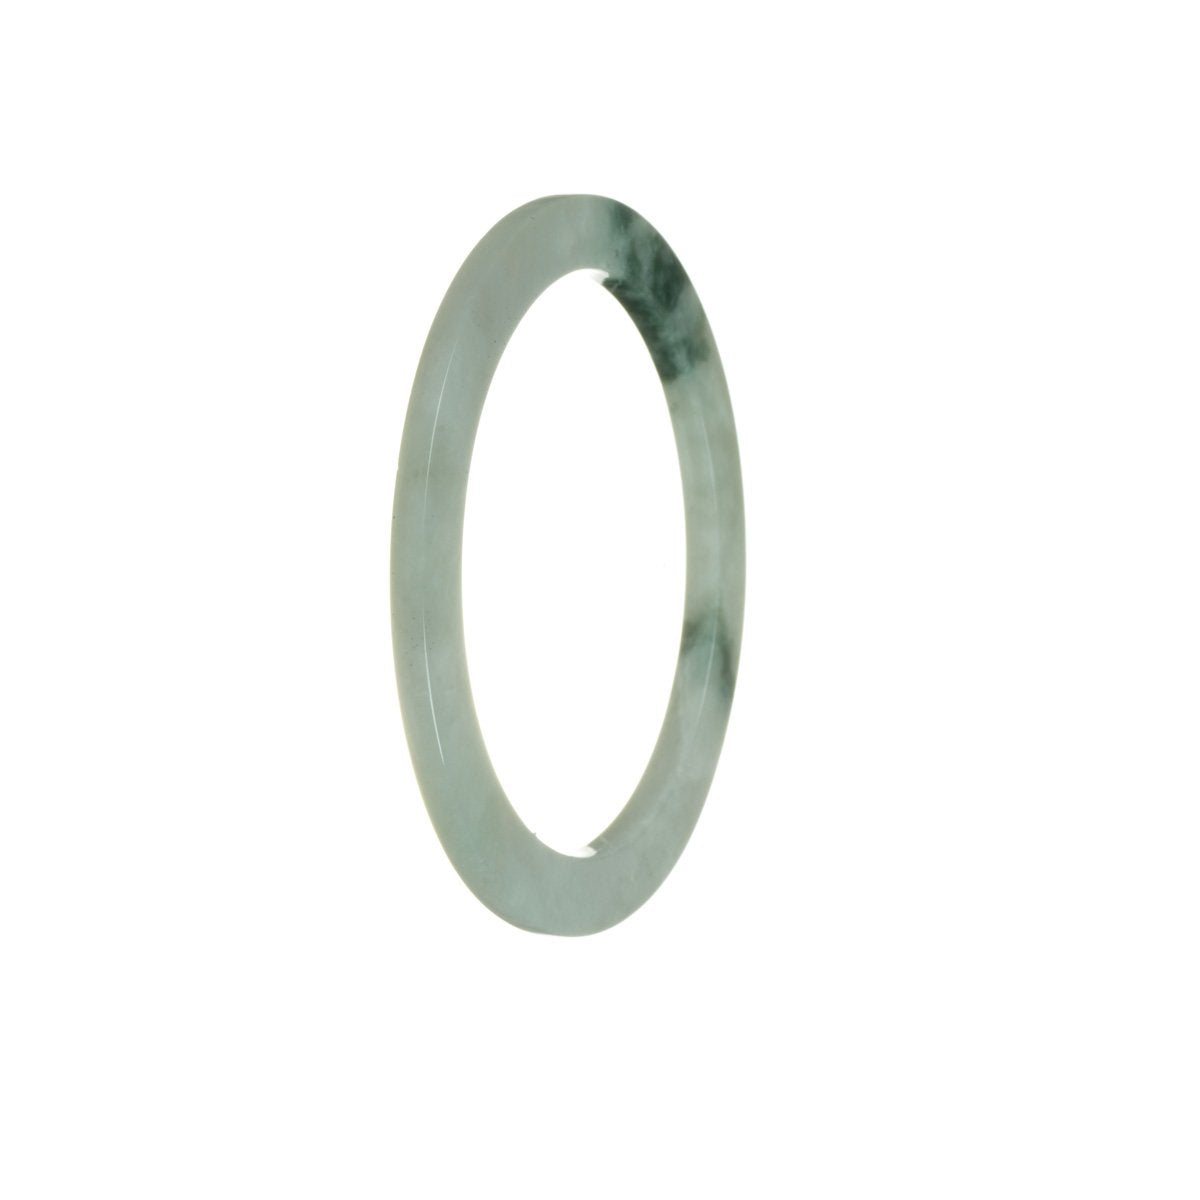 An elegant and delicate Type A Flower Burmese Jade Bangle, measuring 55mm in size. Crafted with authenticity and precision by MAYS™.